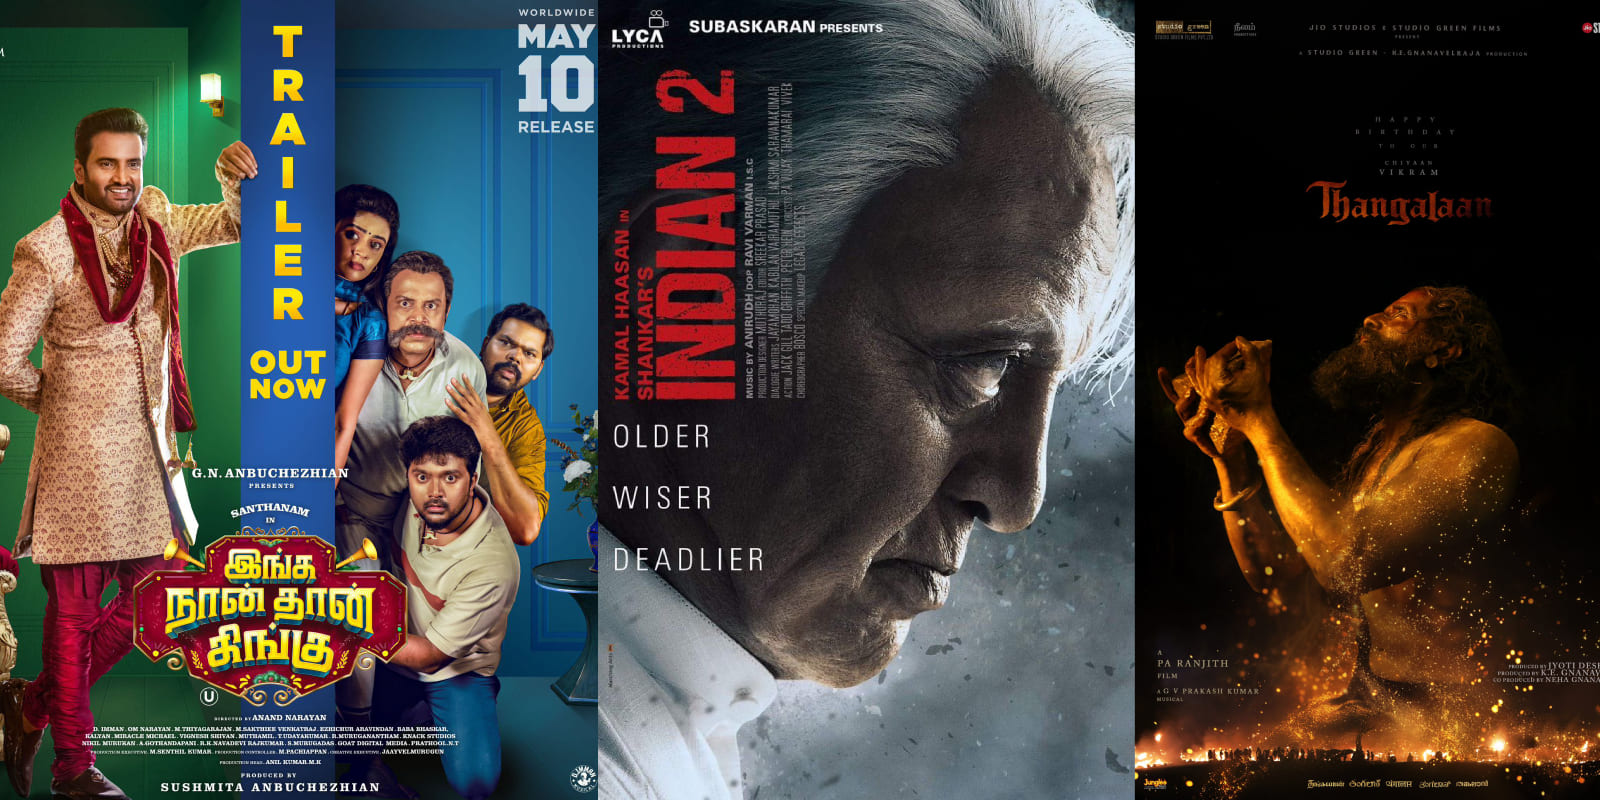 Changes in release dates of Tamil films hit distributors and exhibitors